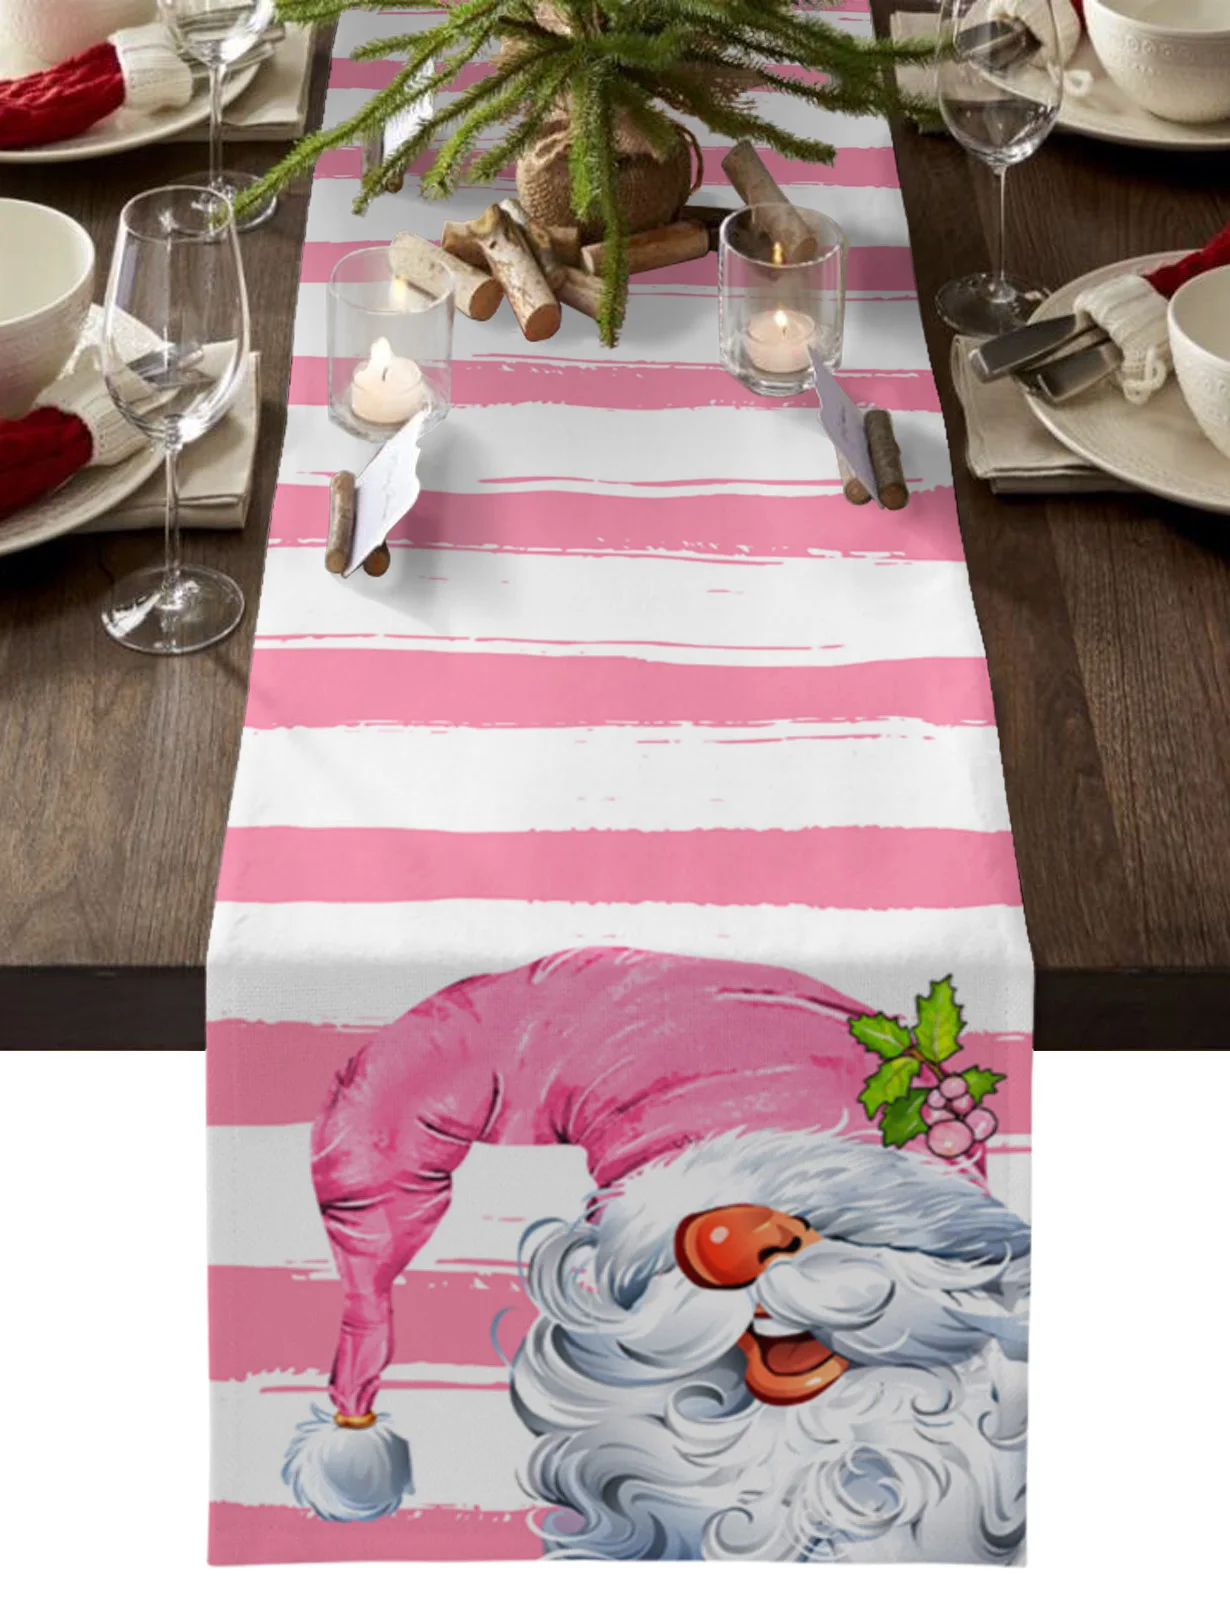 

Christmas Pink Striped Dwarf Pine Nut Hat Table Runner Wedding Party Dining Table Cover Placemat Napkin Home Kitchen Decoration